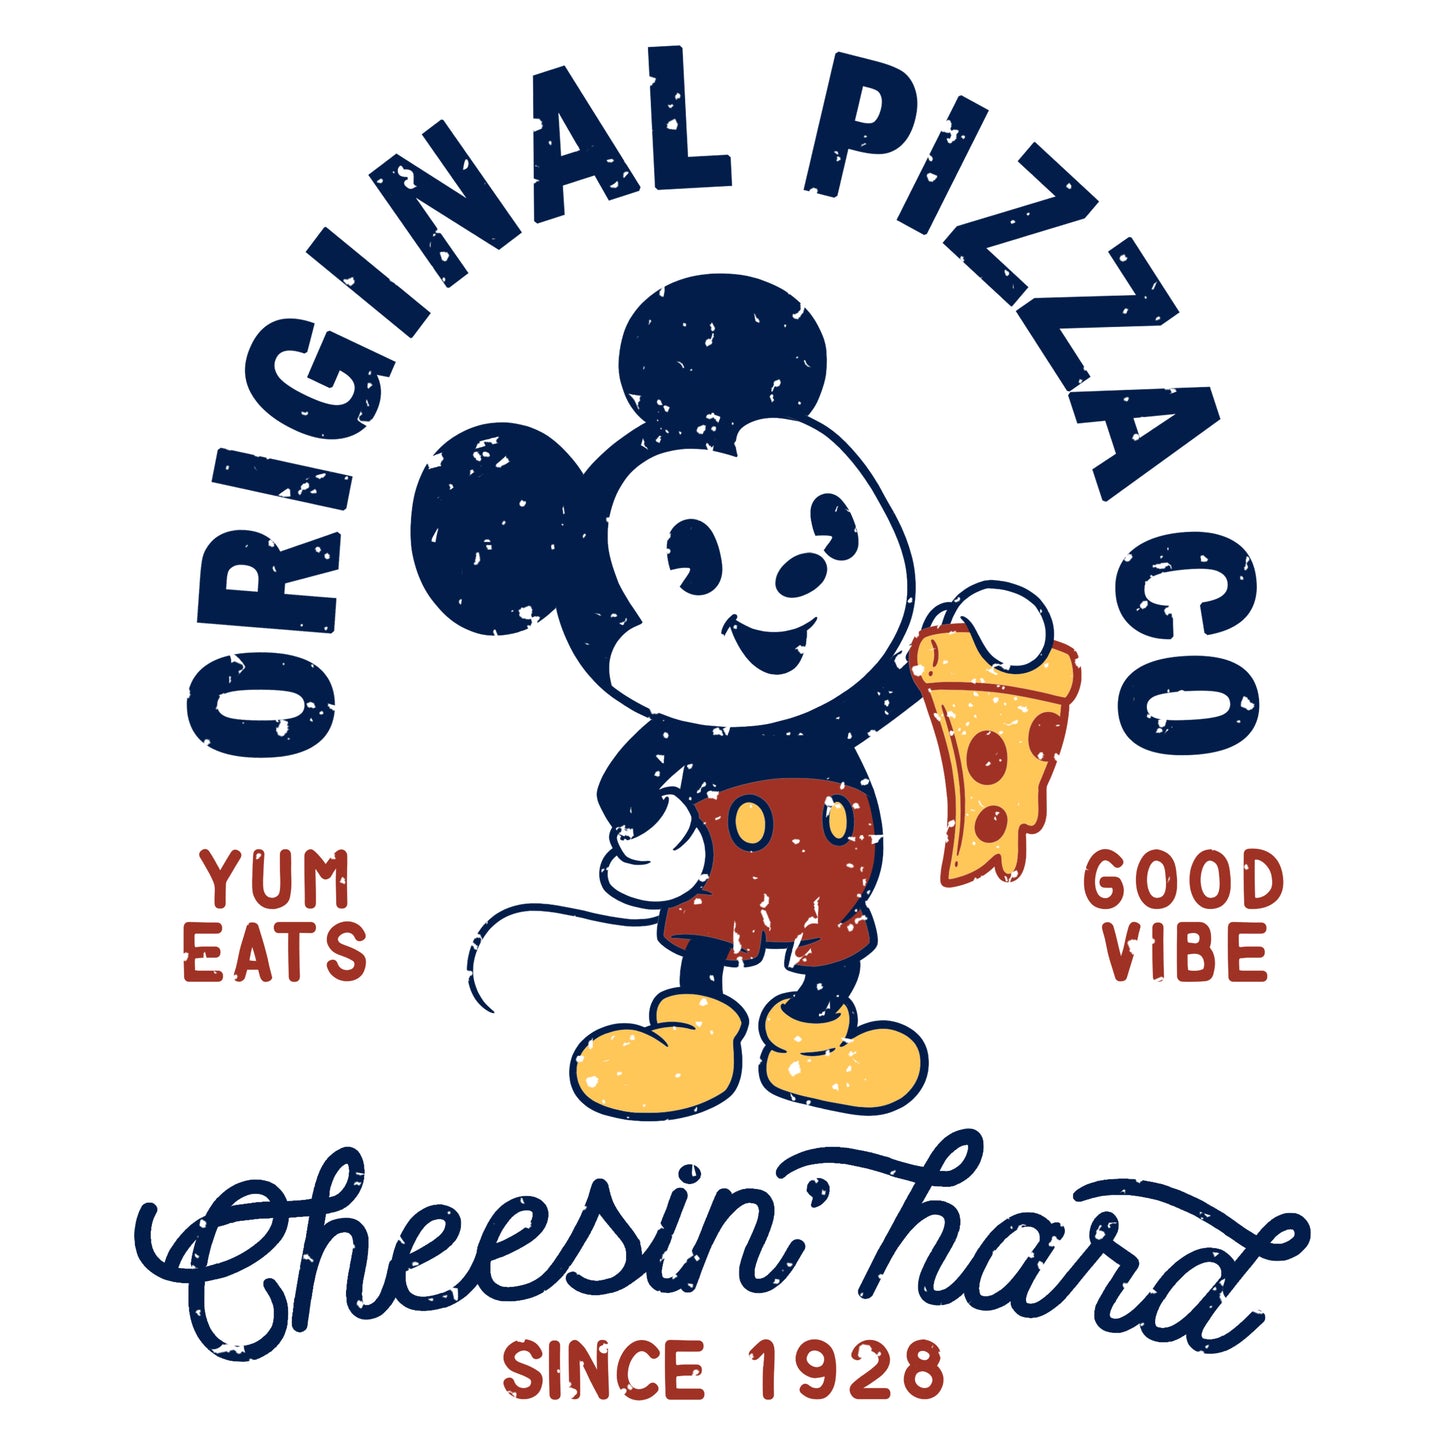 The officially licensed logo for Mickey's Pizza Company, Disney.